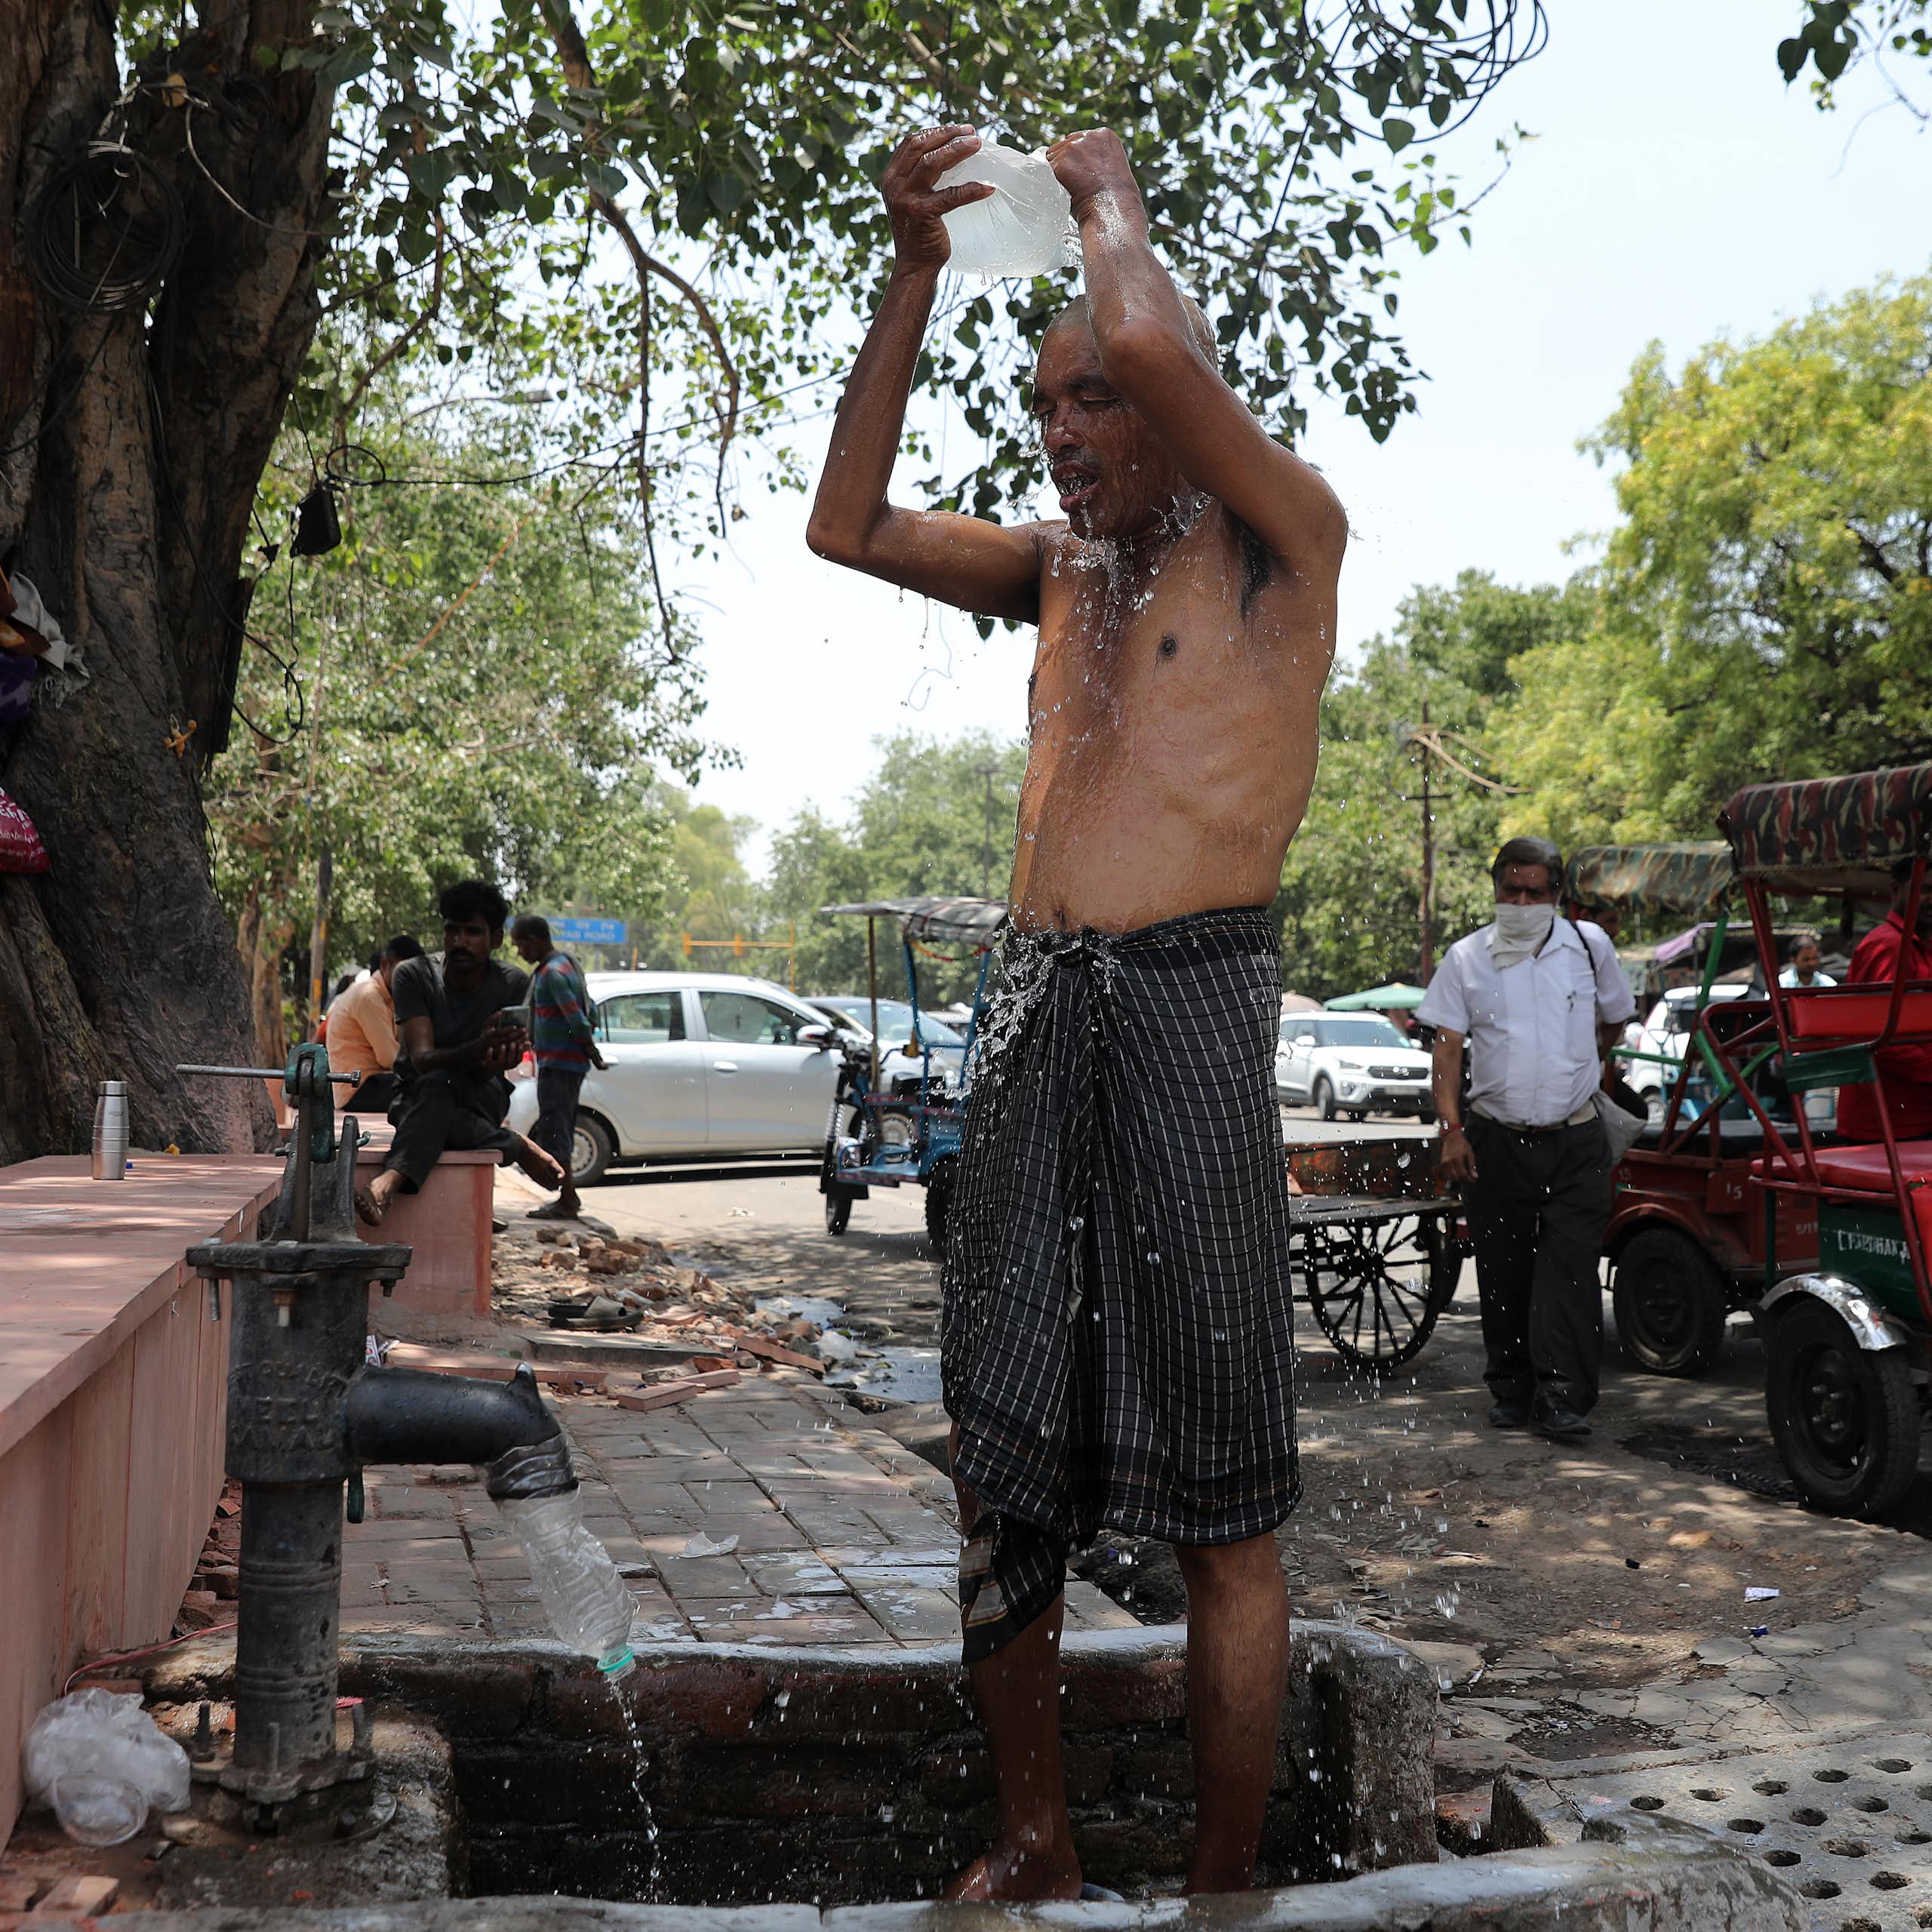 The Delhi heatwave is testing the limits of human endurance. Other hot countries should beware and prepare